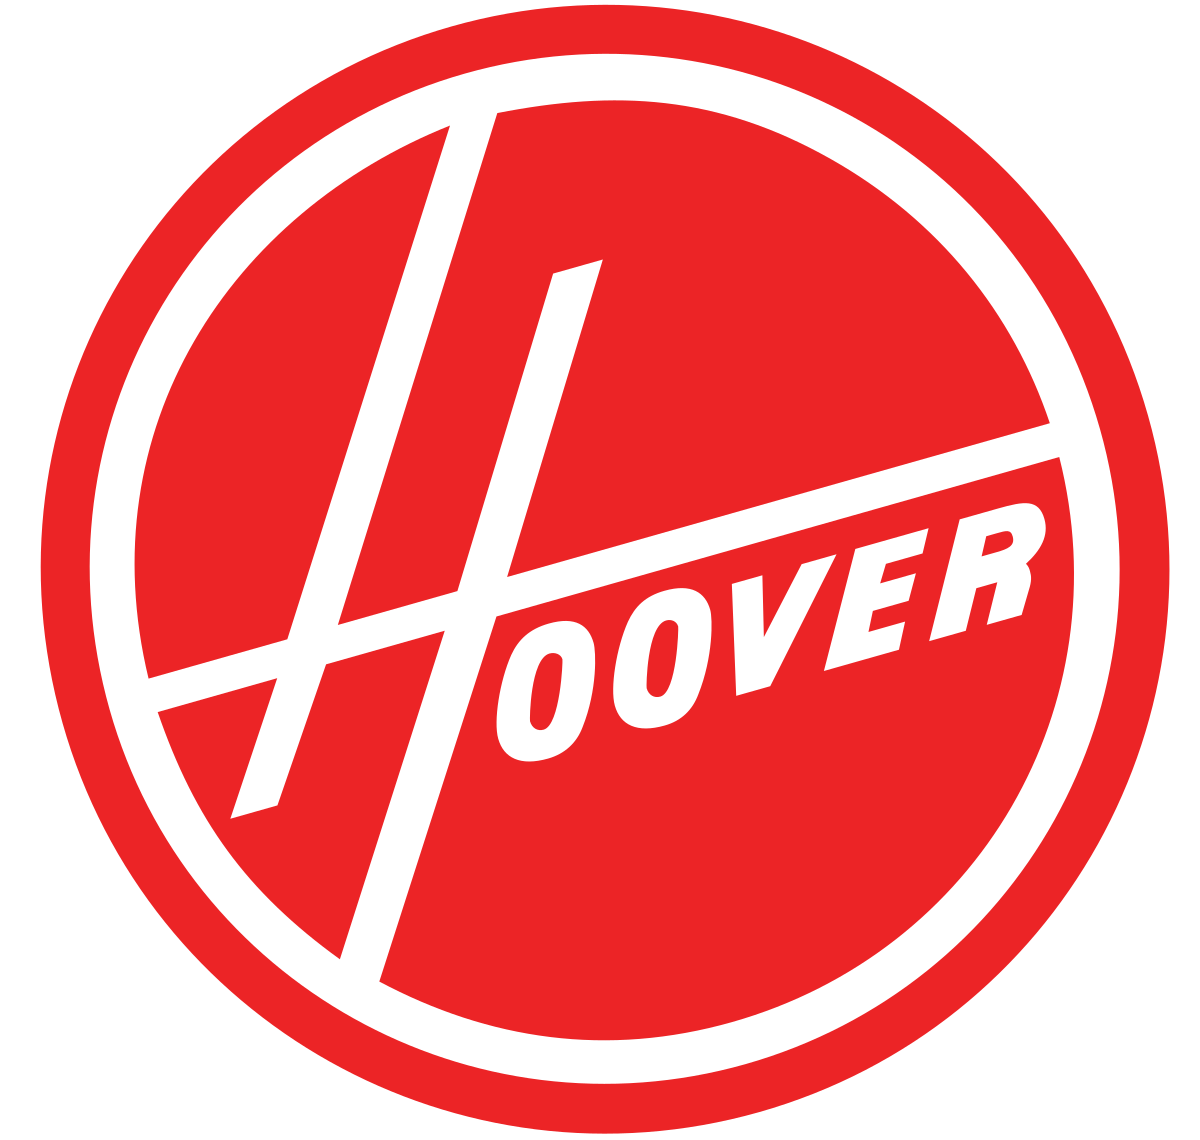 Hoover!